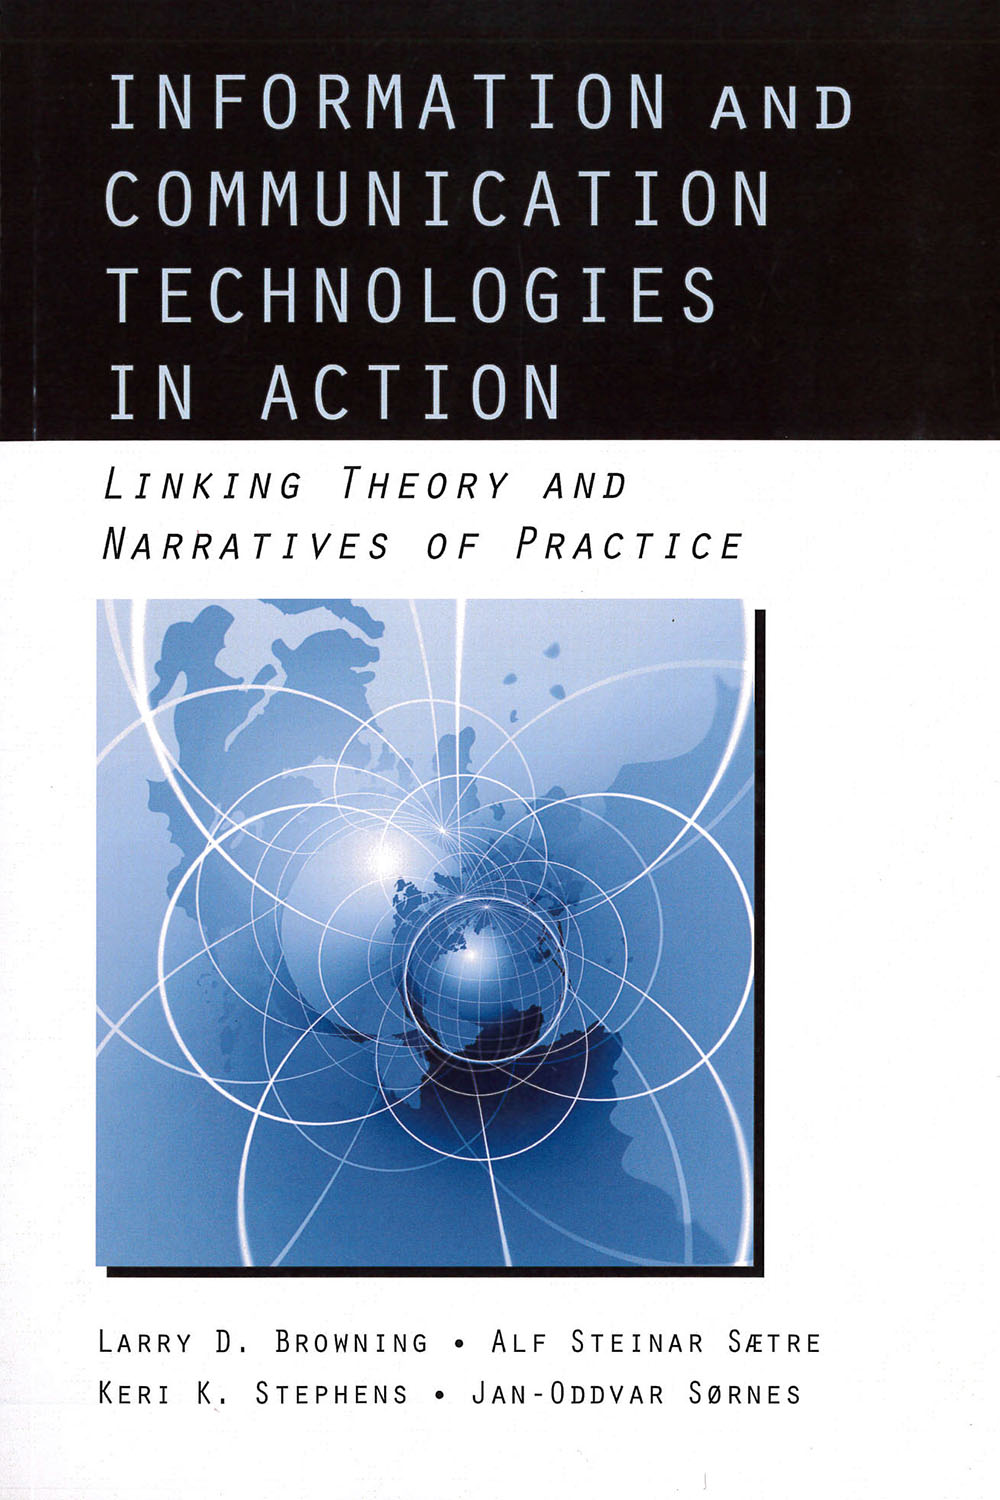 10 / 26 - TK5101 B76 Information and communication technology in action, Larry Browning - 
Routledge, New York 2008